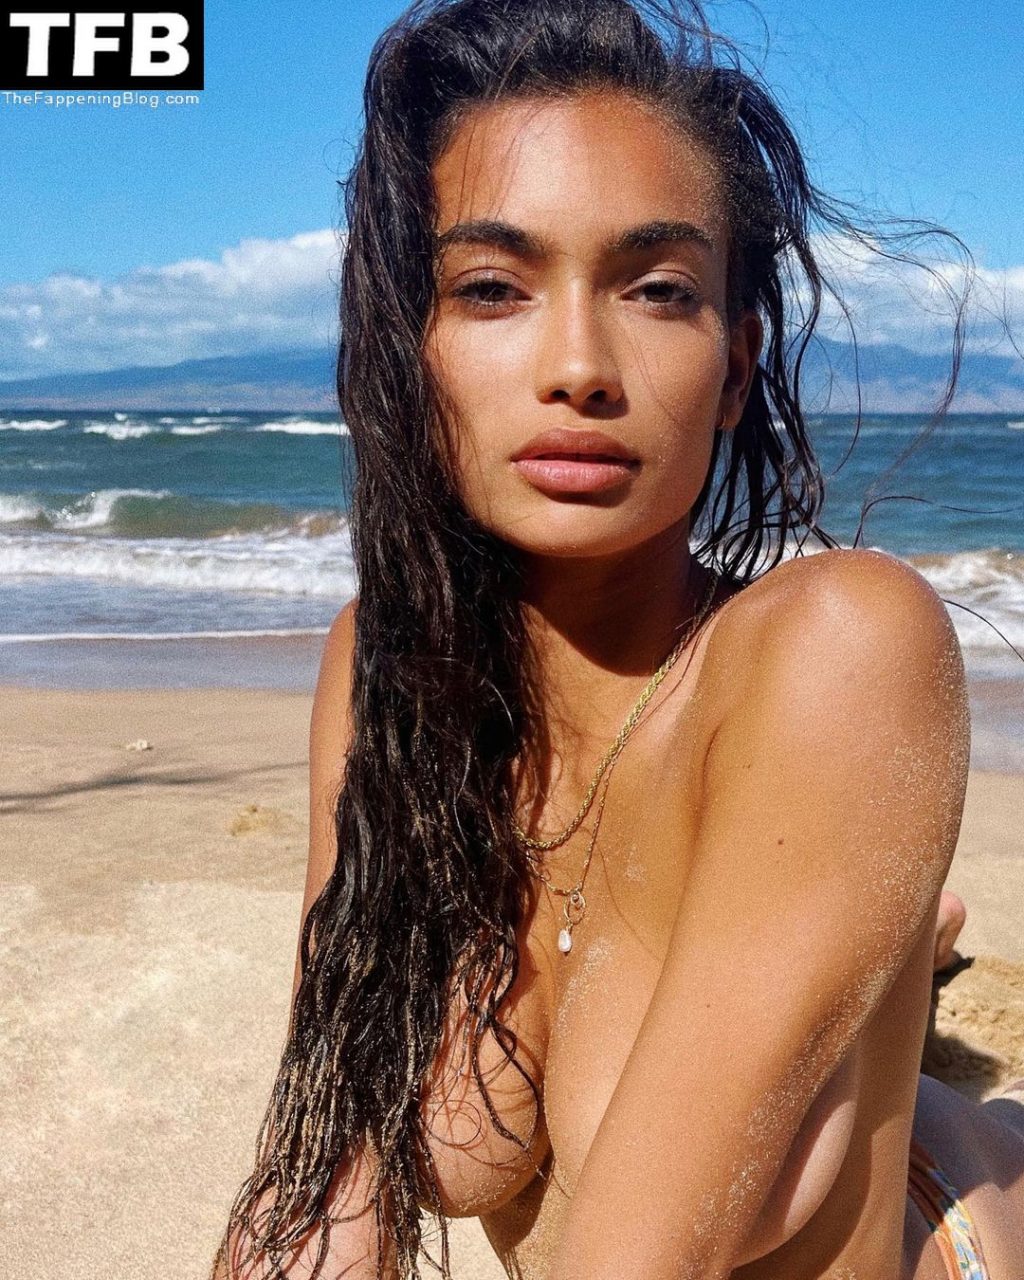 Kelly Gale Poses Topless (2 Photos)